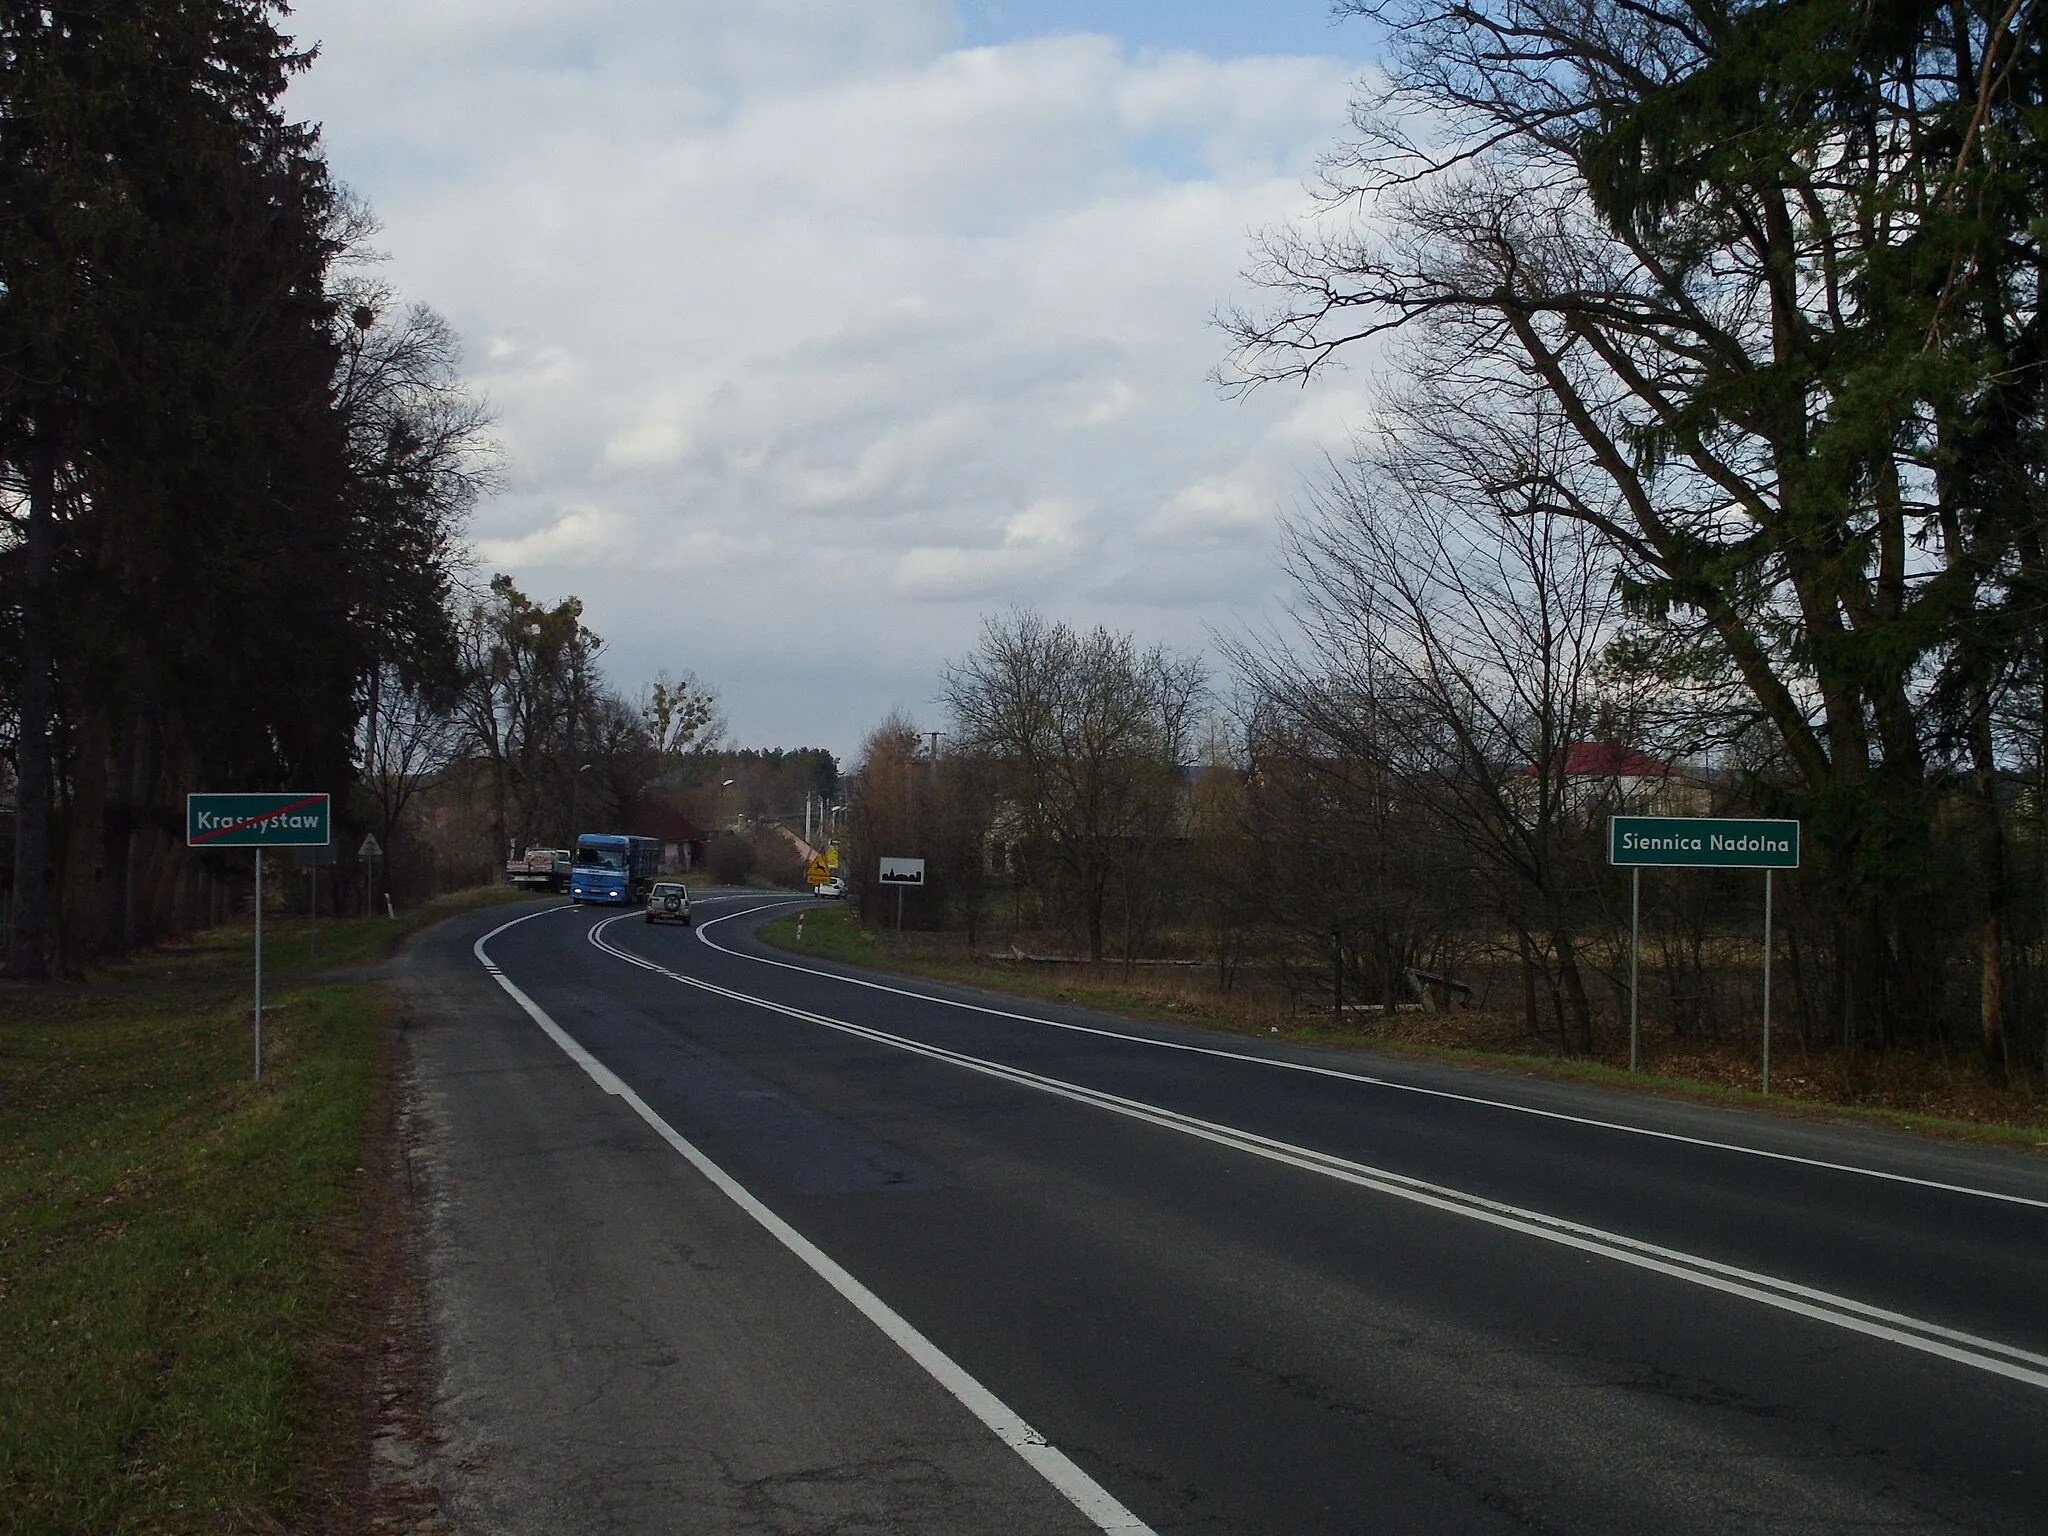 Photo showing: Main road entering Siennica Nadolna from Krasnystaw, Poland.